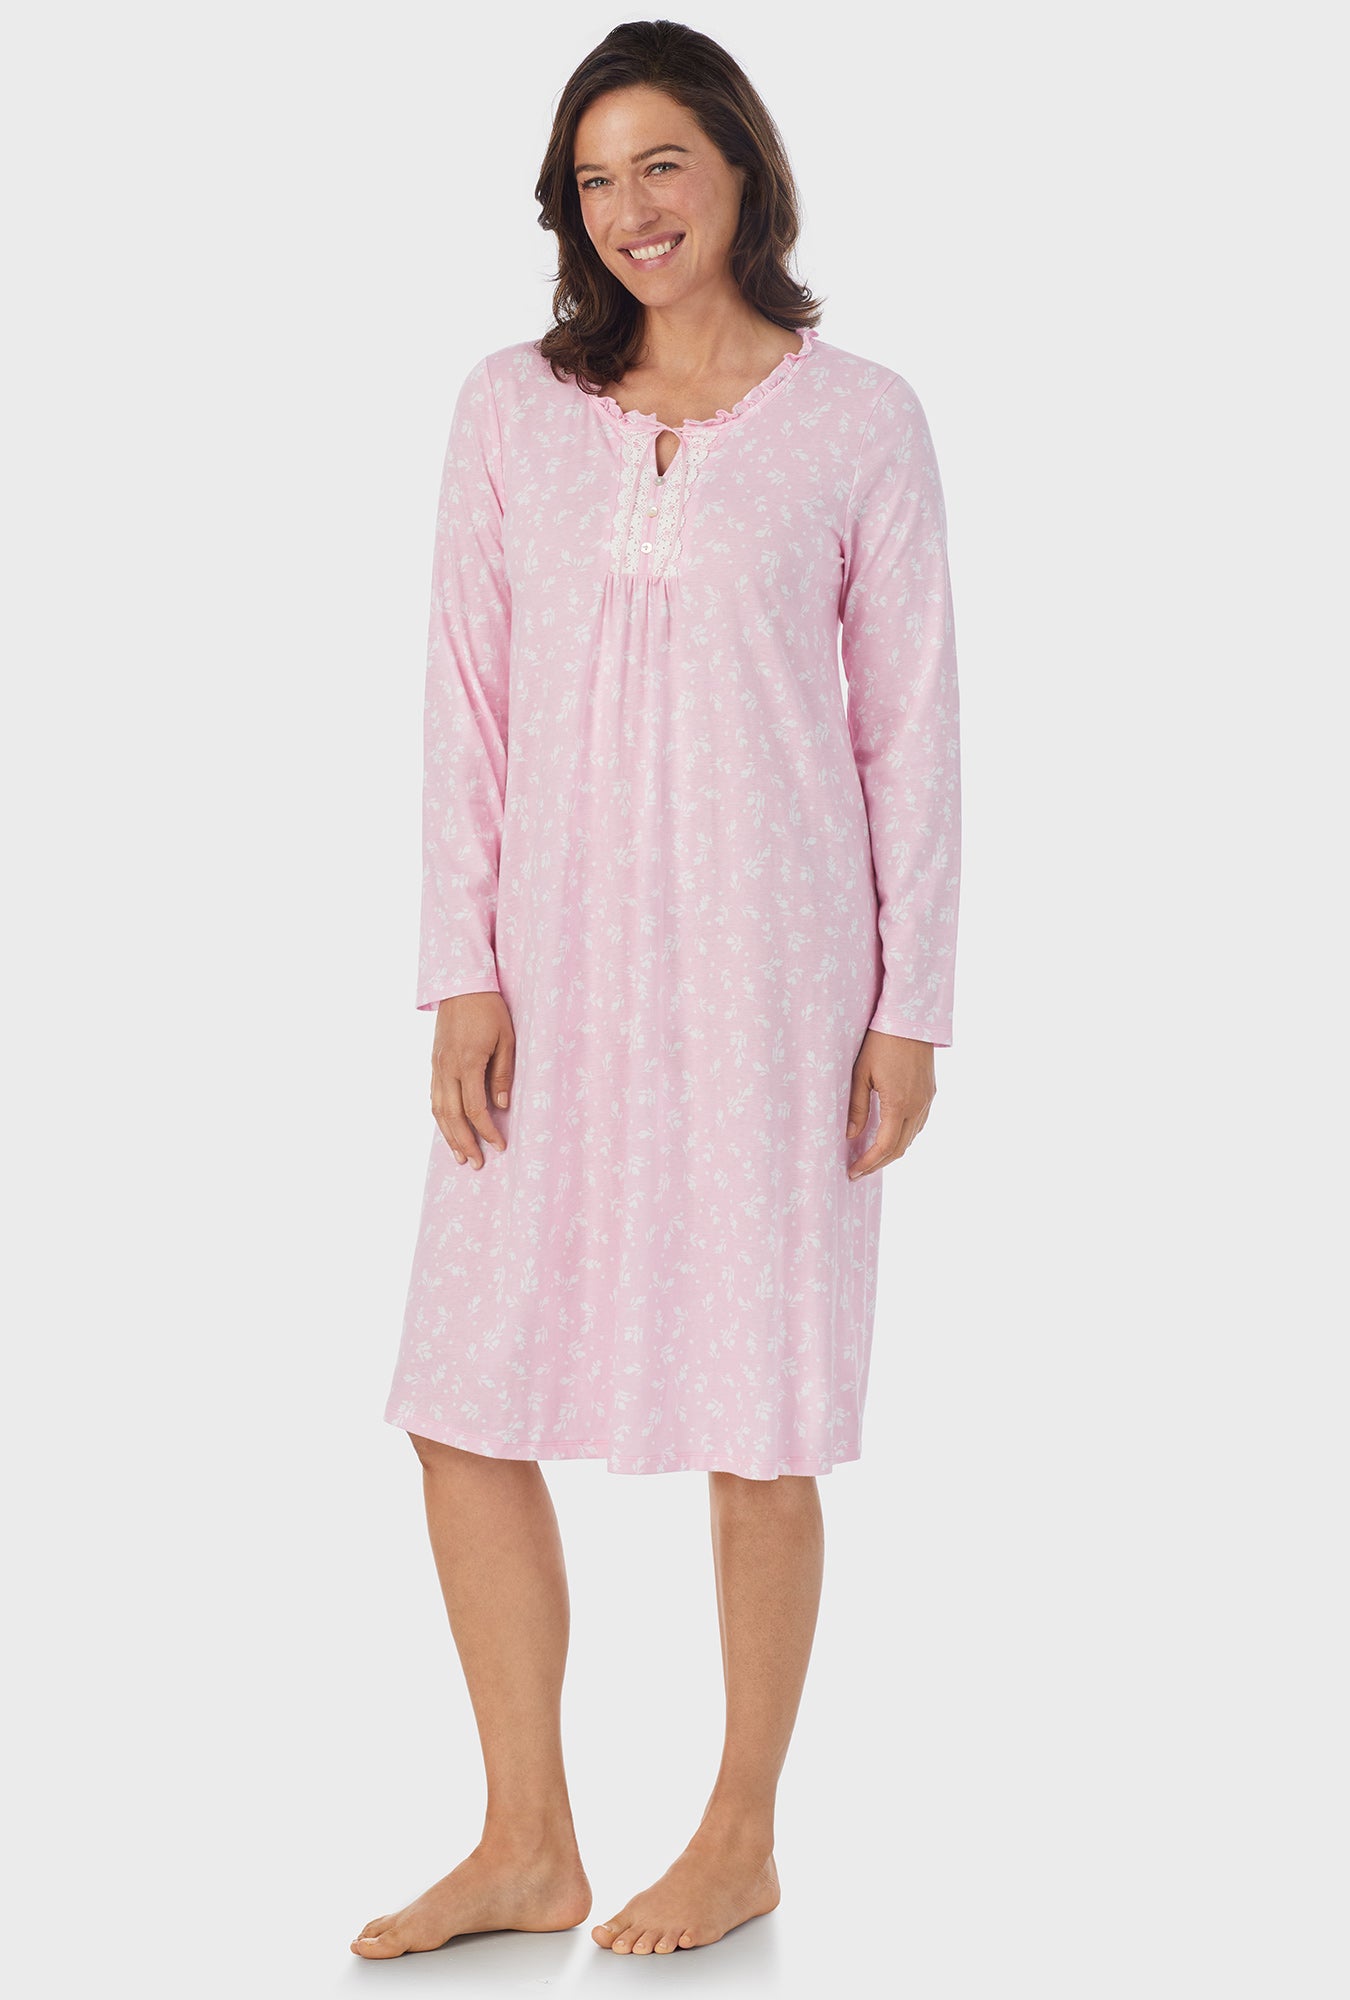 A lady wearing pink Long Sleeve Midi Nightgown with White Rosebuds  print